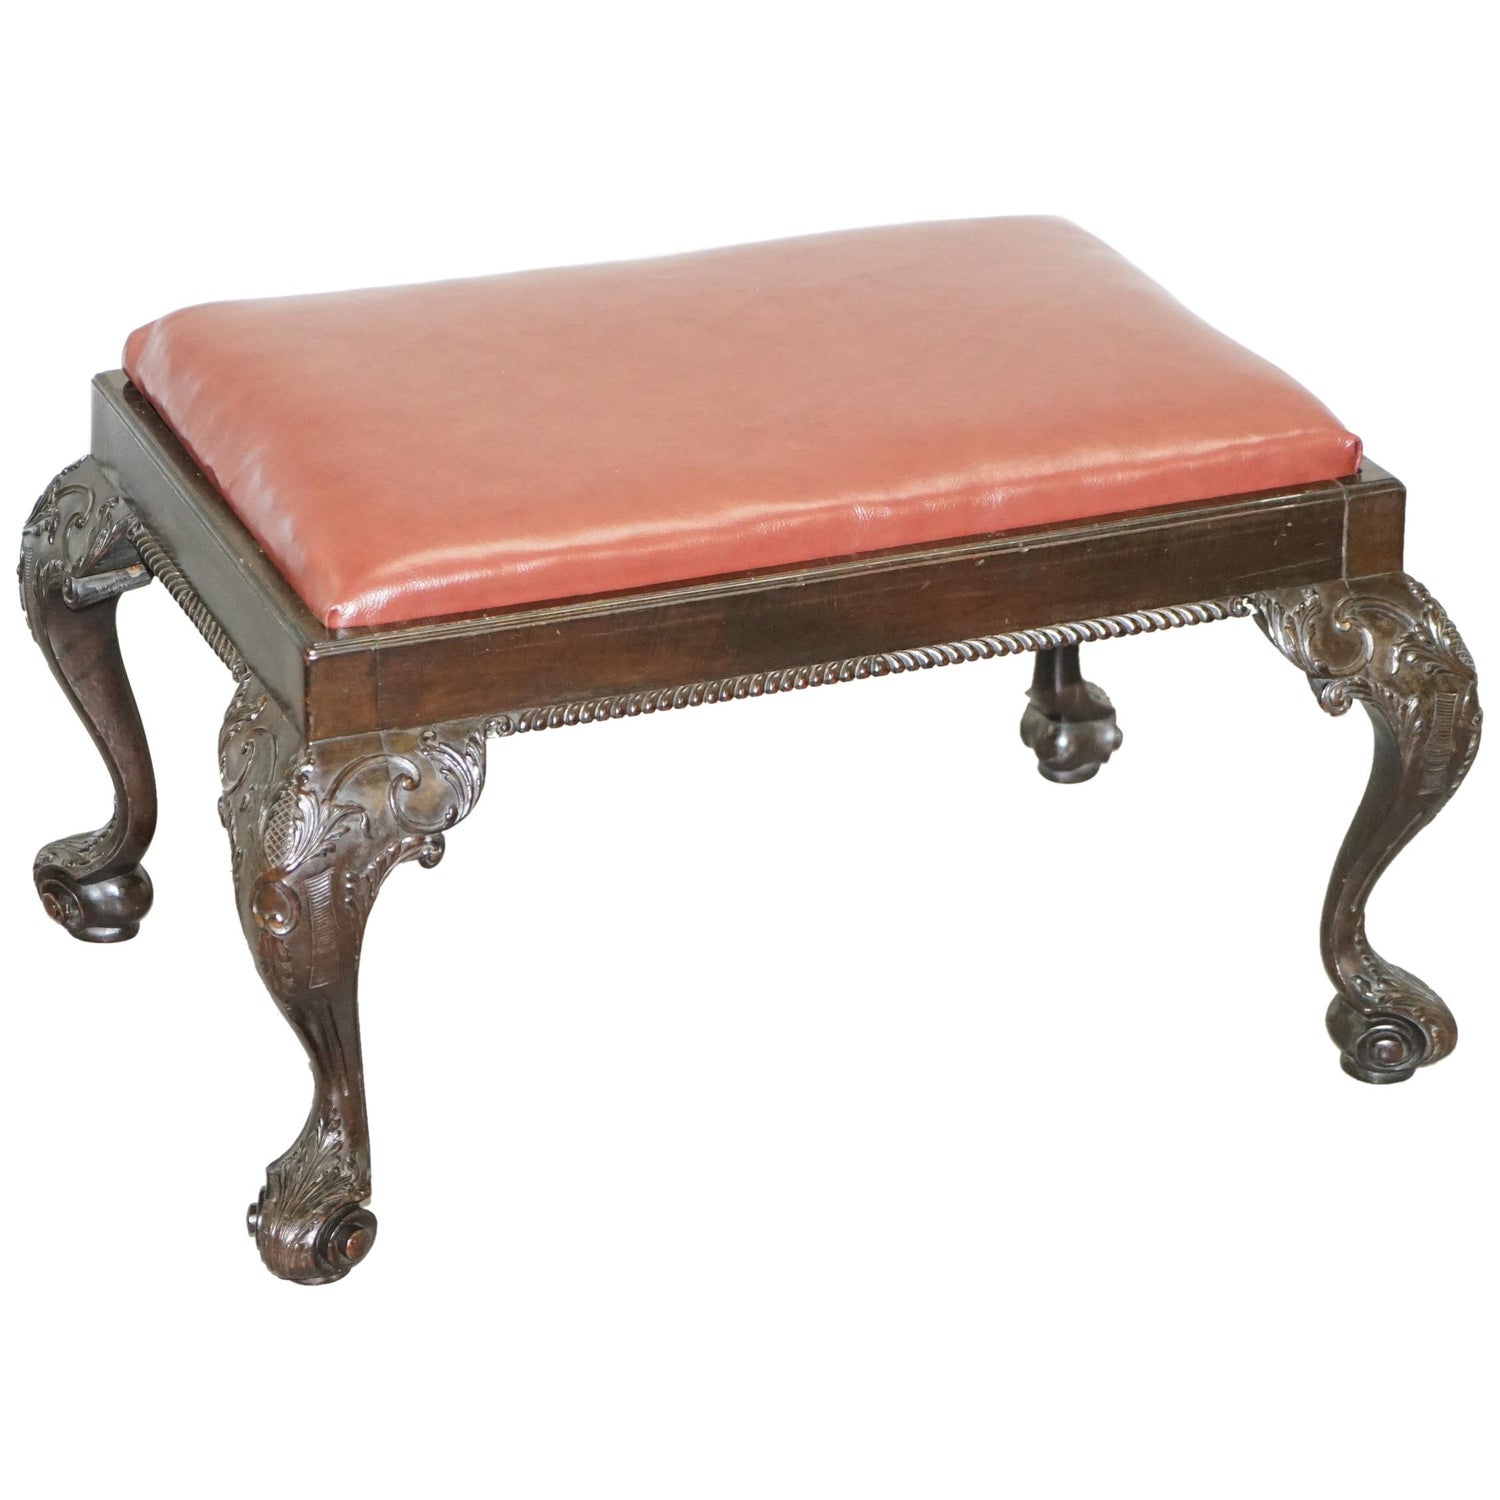 Small Georgian English Country House Footstool with Embroidered Top, 1920s  for sale at Pamono